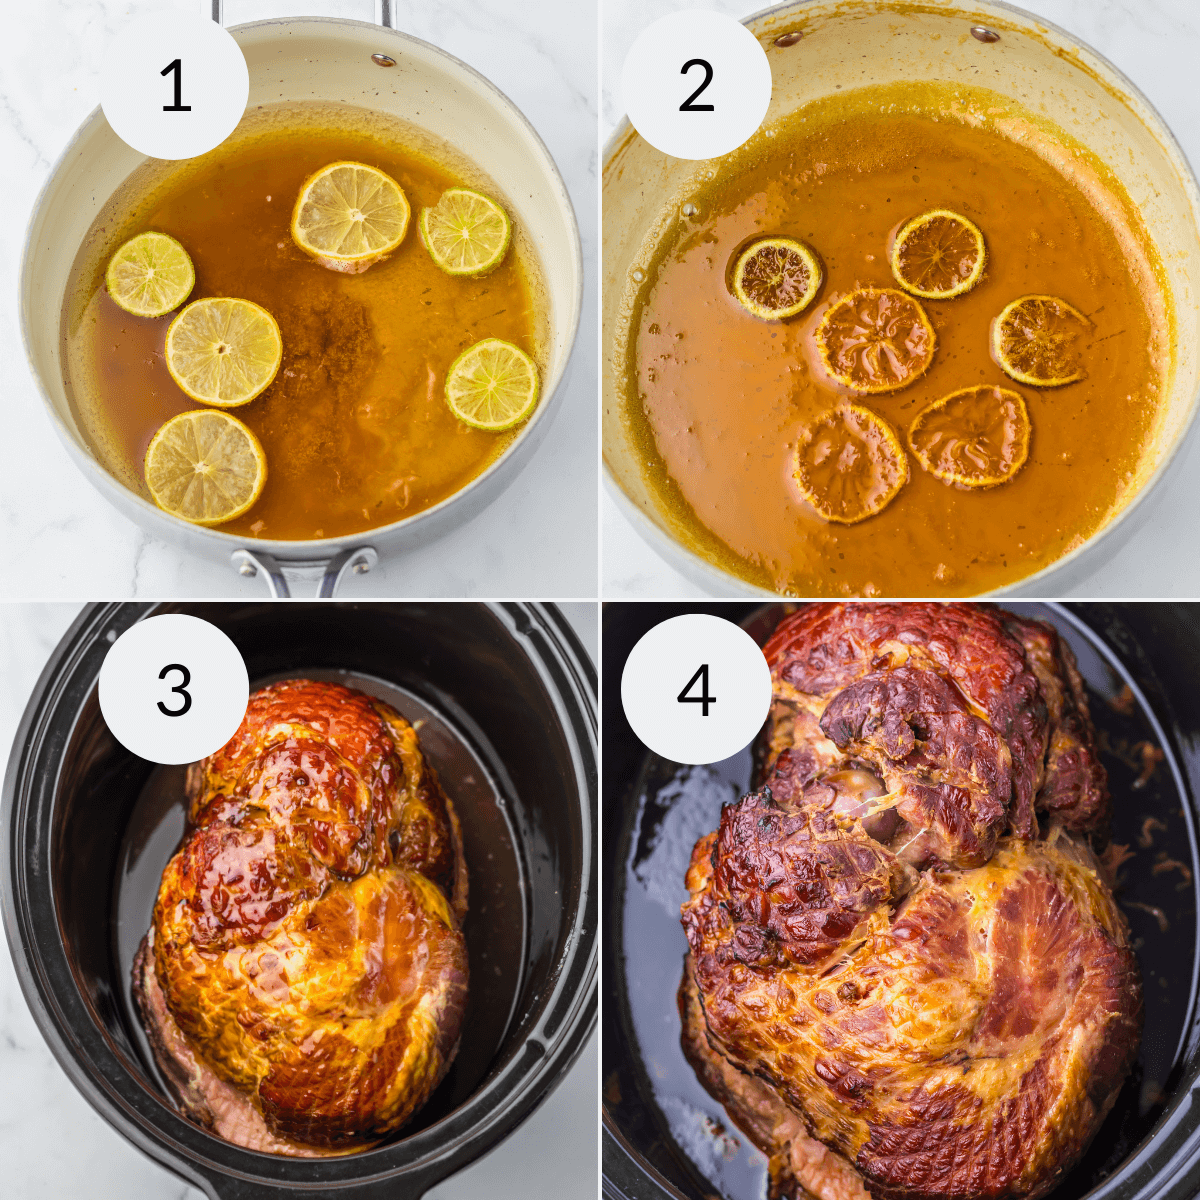 Step-by-step preparation of a dish: 1) ingredients in a pot, 2) cooked sauce with ingredients, 3) raw spiral ham in a crock pot, 4